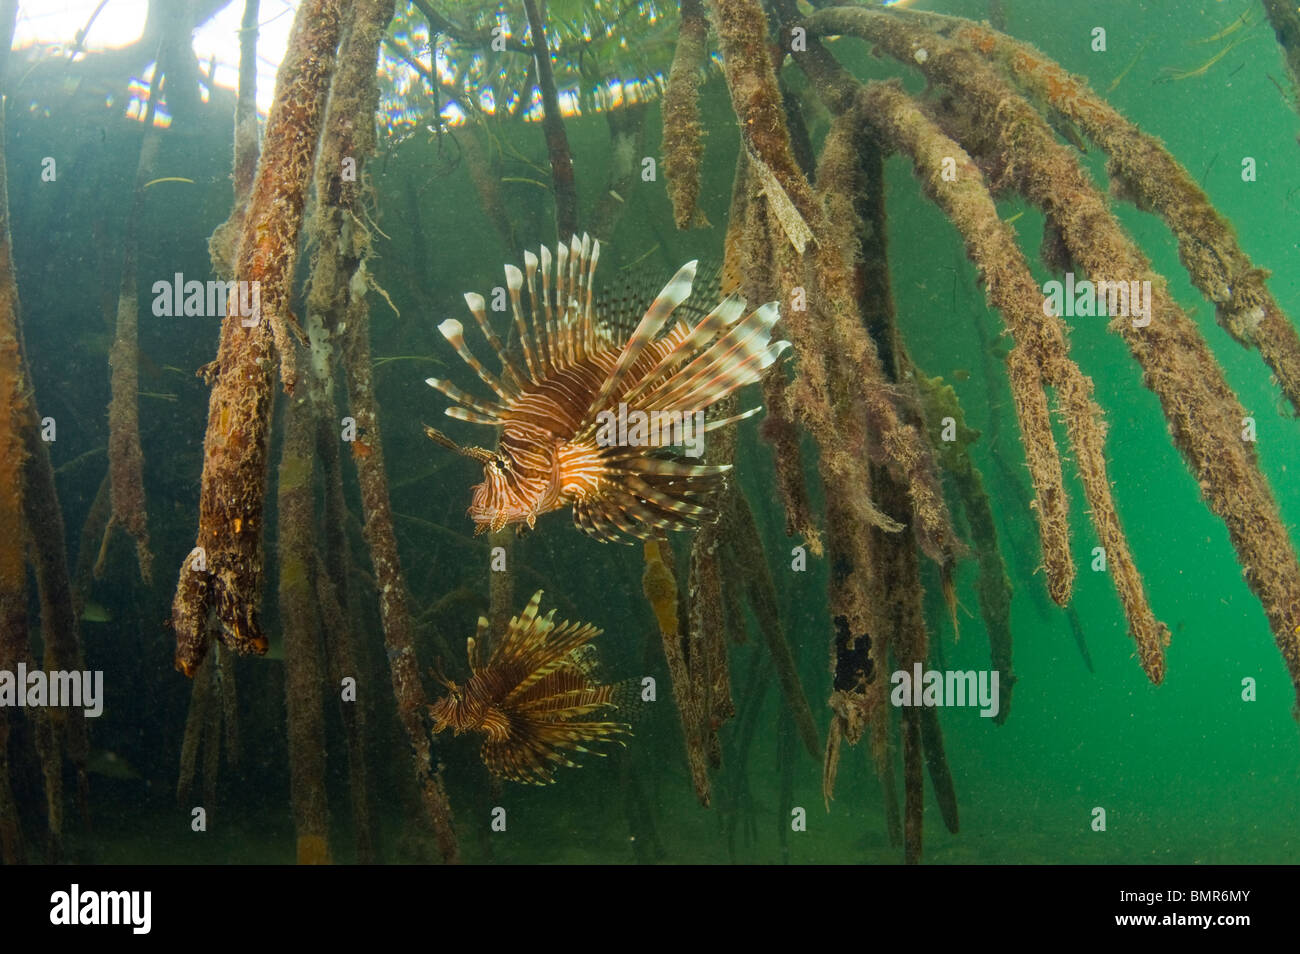 Volitans Lionfish (Pterois volitans), an invasive species, in the mangroves of Southwest Caye in Belize. Stock Photo